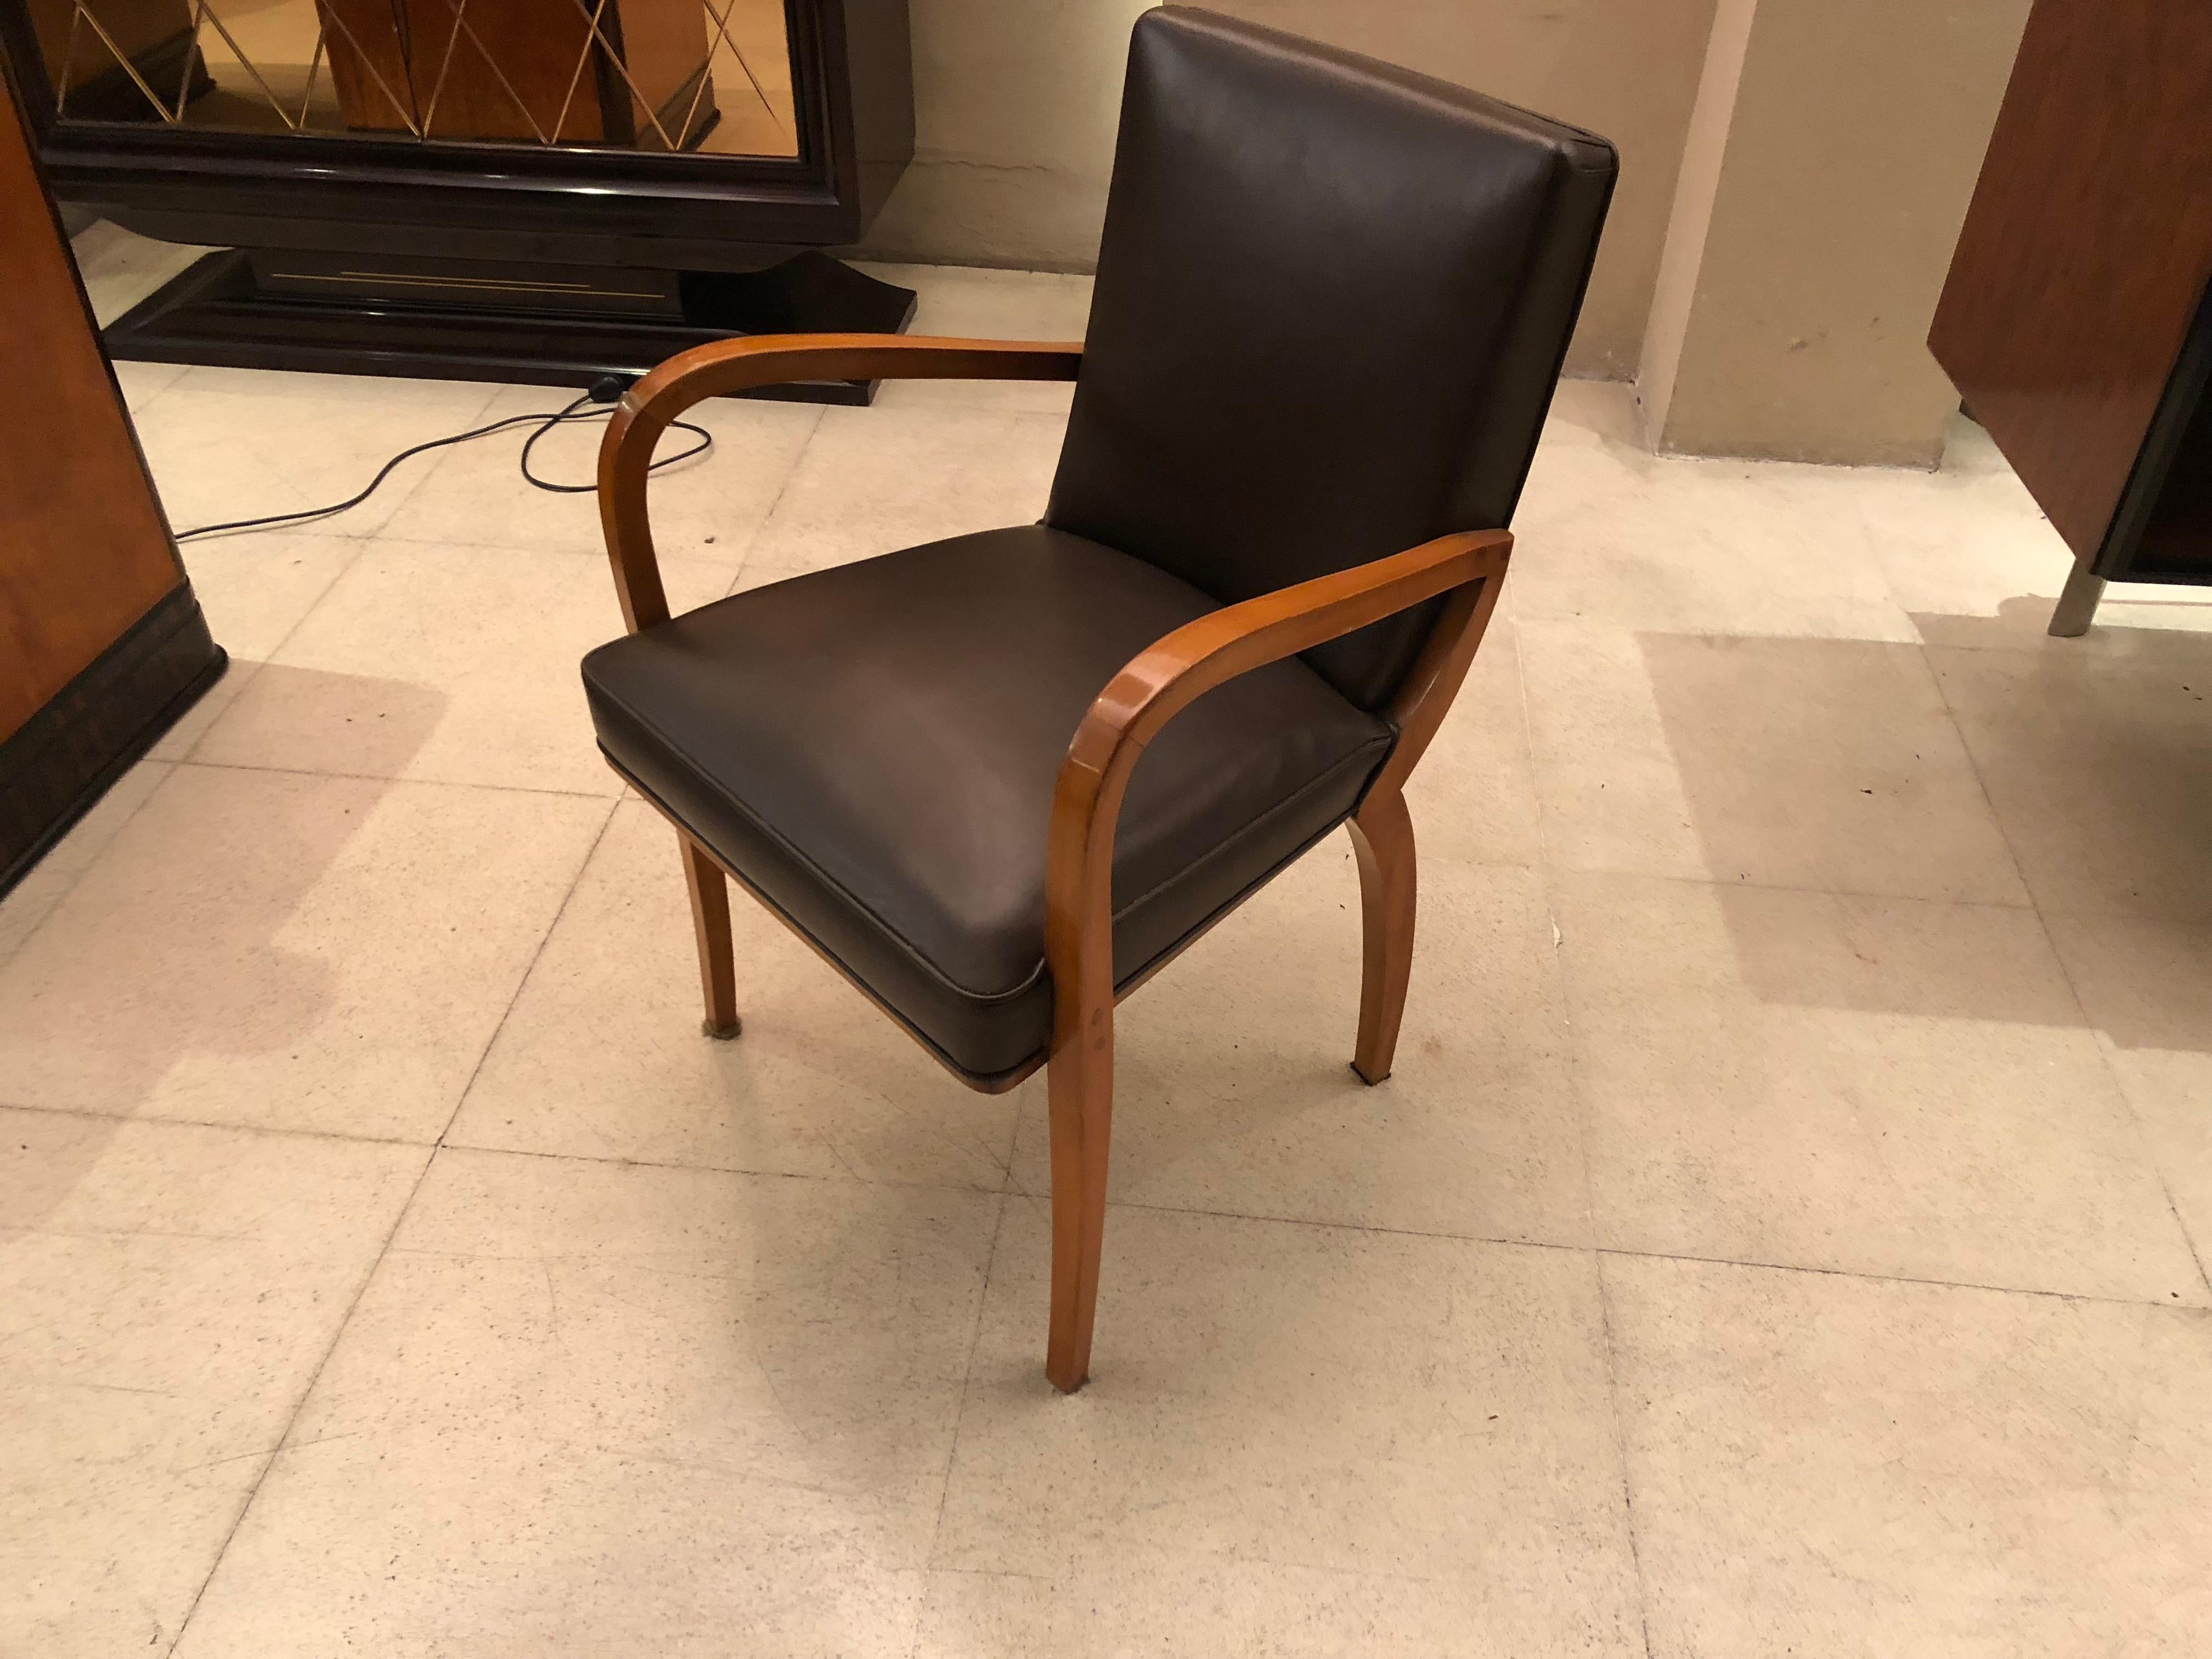 French Desk Chair Style: Art Deco, France, Material Wood and Leather, 1930 For Sale